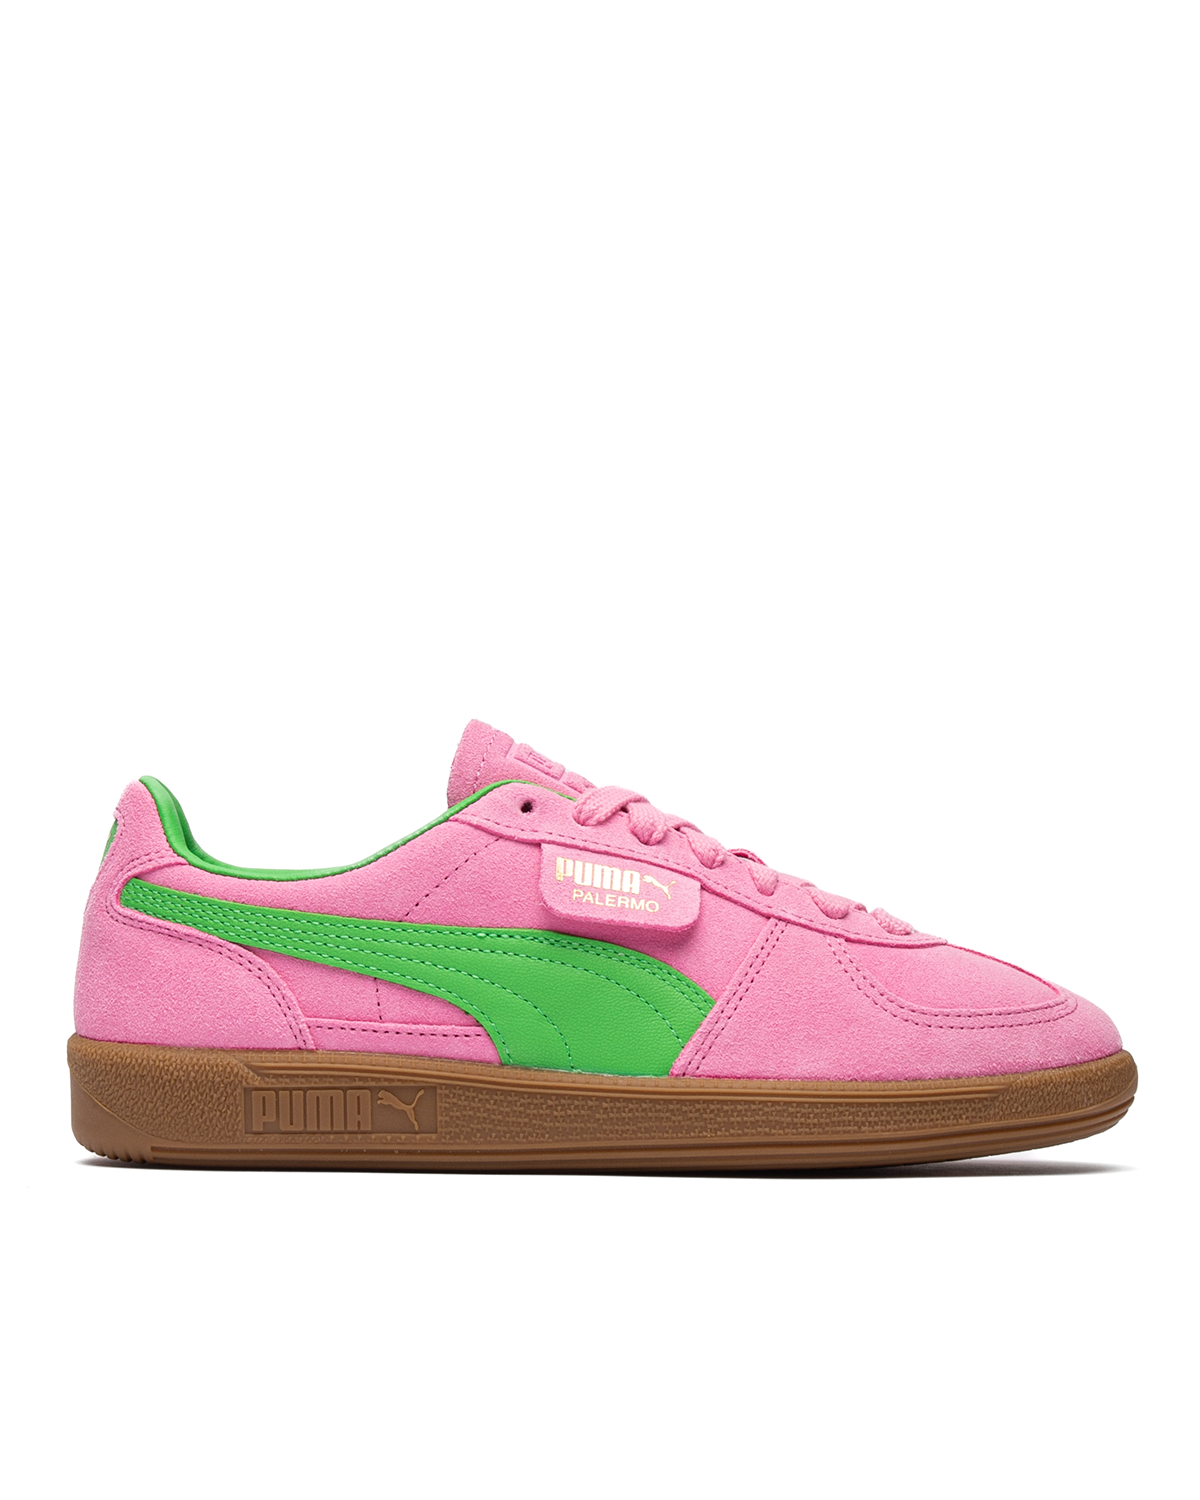 Wmns Palermo Special Pink Delight/Puma Green/Gum